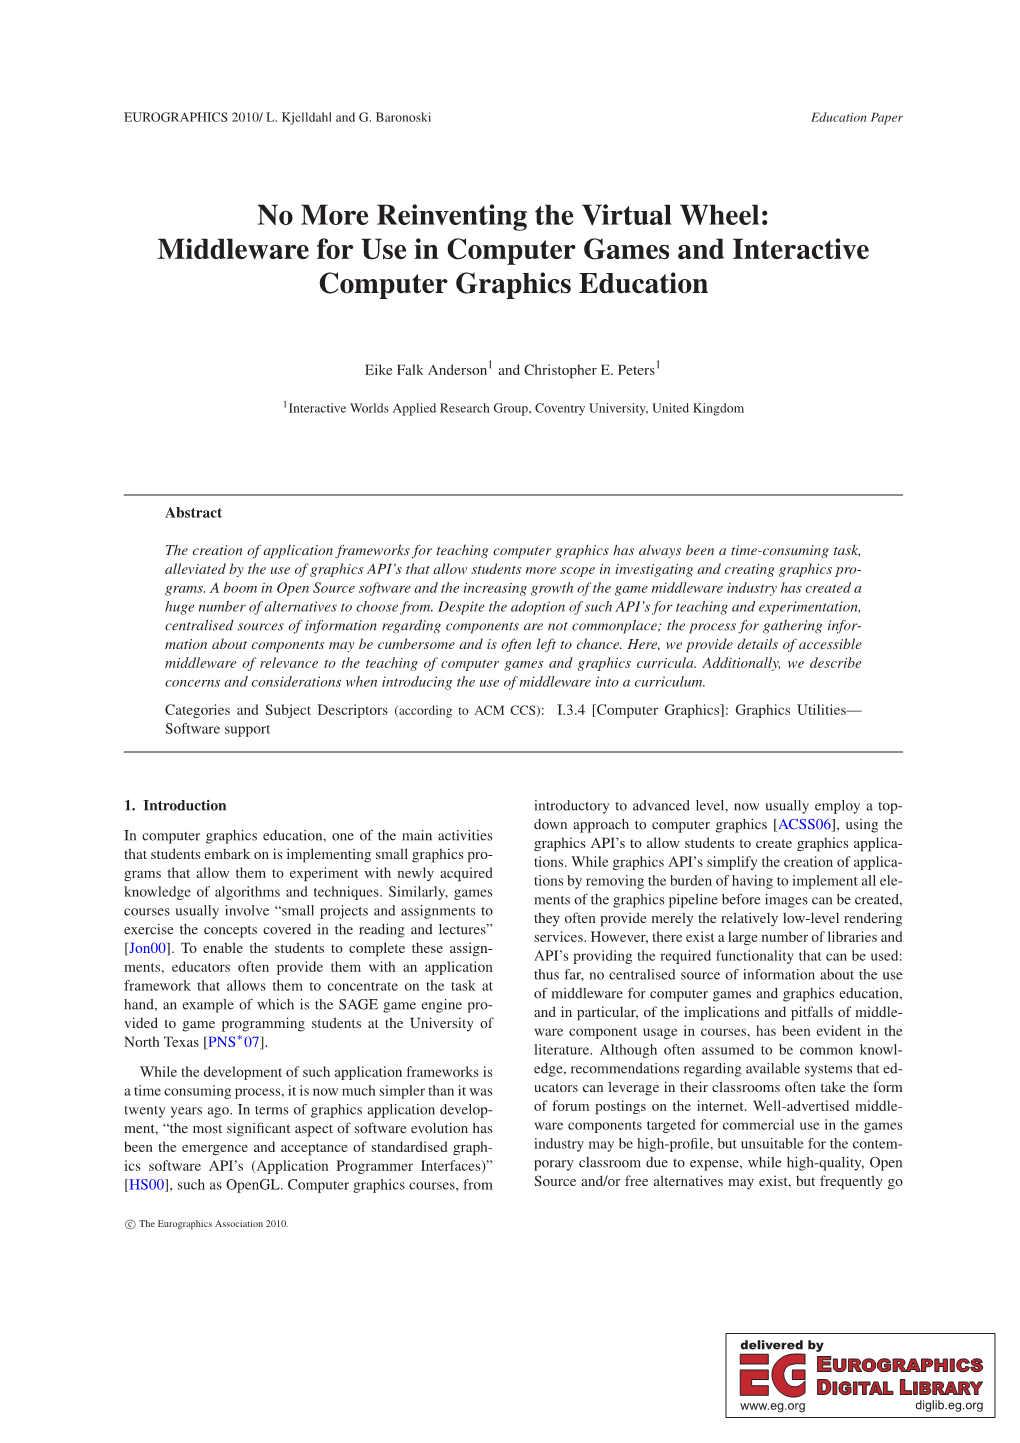 Middleware for Use in Computer Games and Interactive Computer Graphics Education